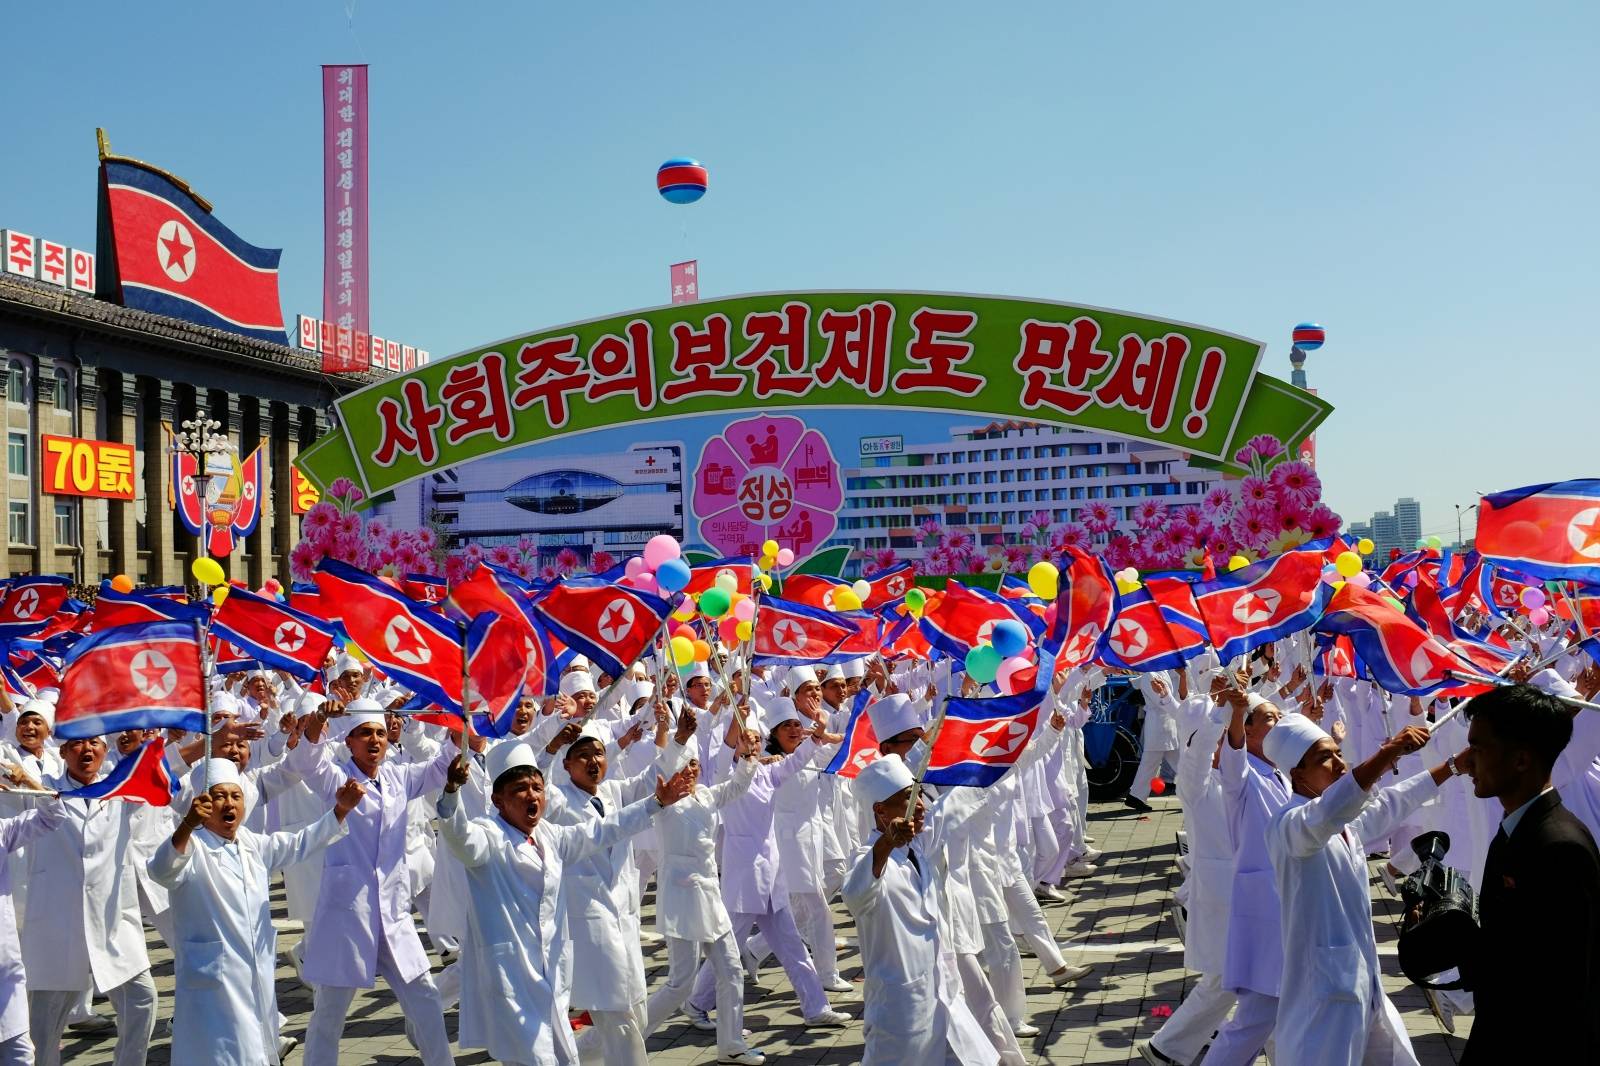 North Koreans march alongside a float celebrating the country’s socialist health system during a parade in Pyongyang